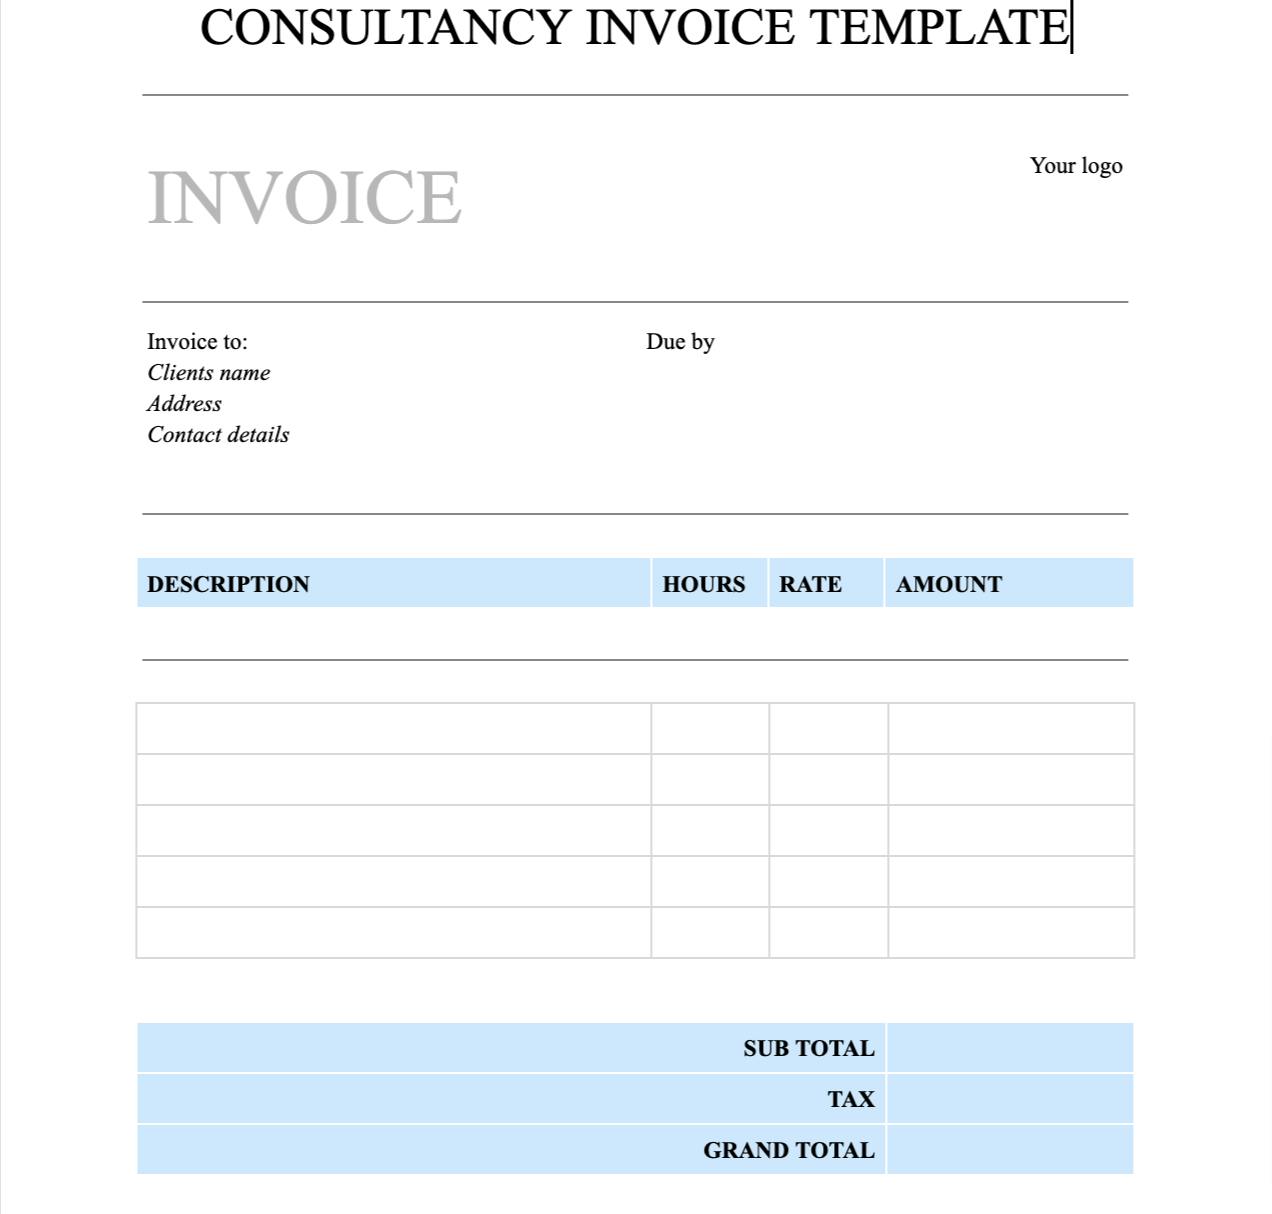 Consultancy invoice template in google docs